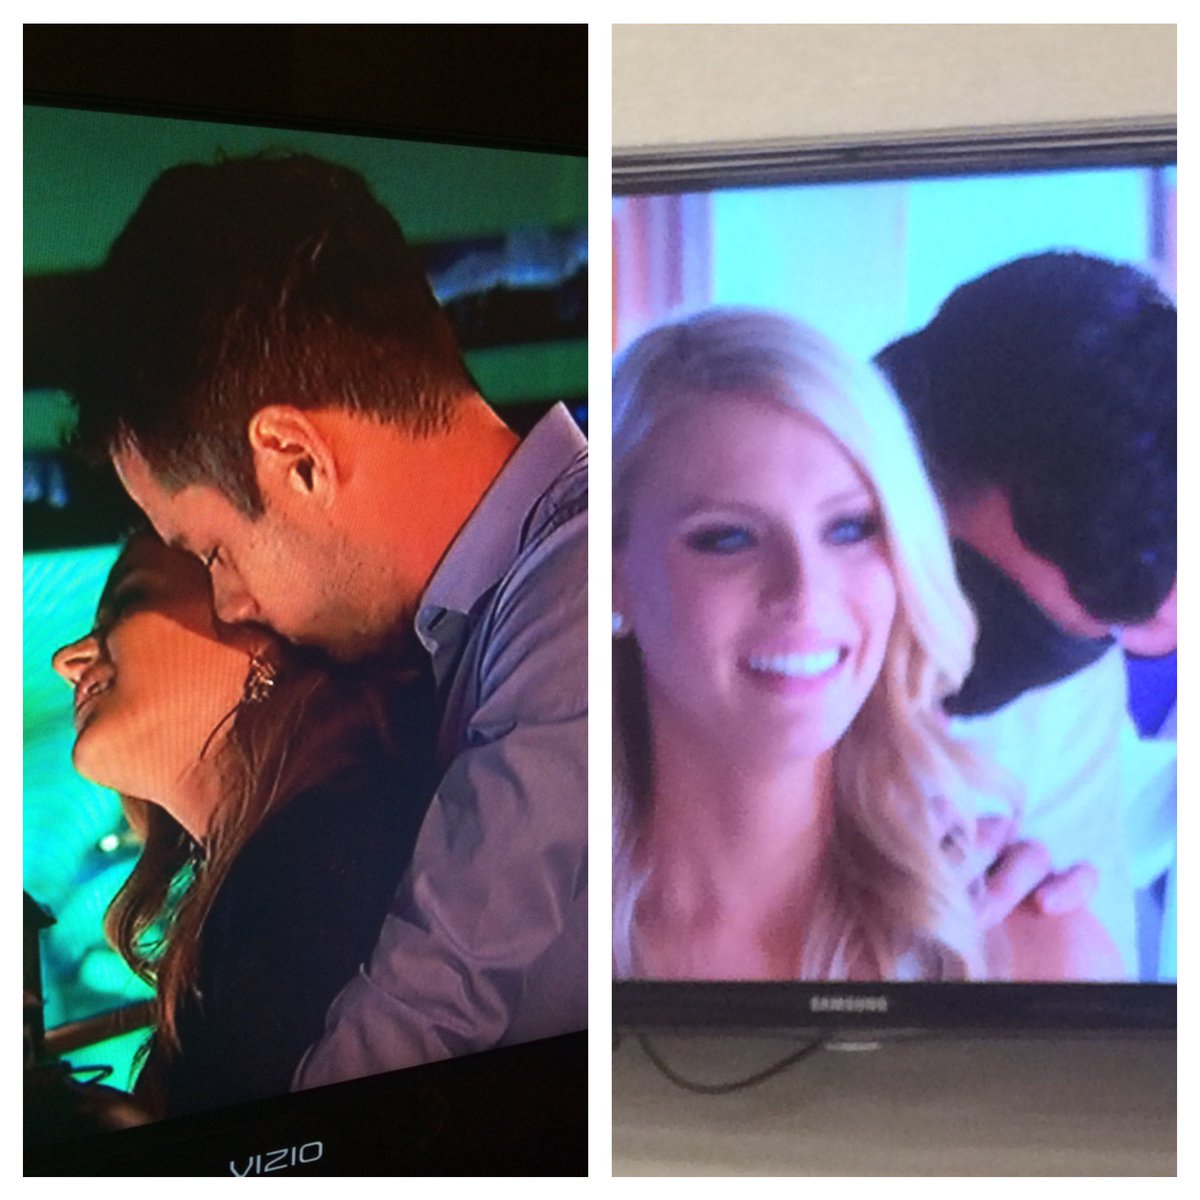 20 - The Bachelor 20 - Ben Higgins - Episode 4 - Discussion - *Sleuthing - Spoilers* - Page 38 CZm91N8XEAMOw1c